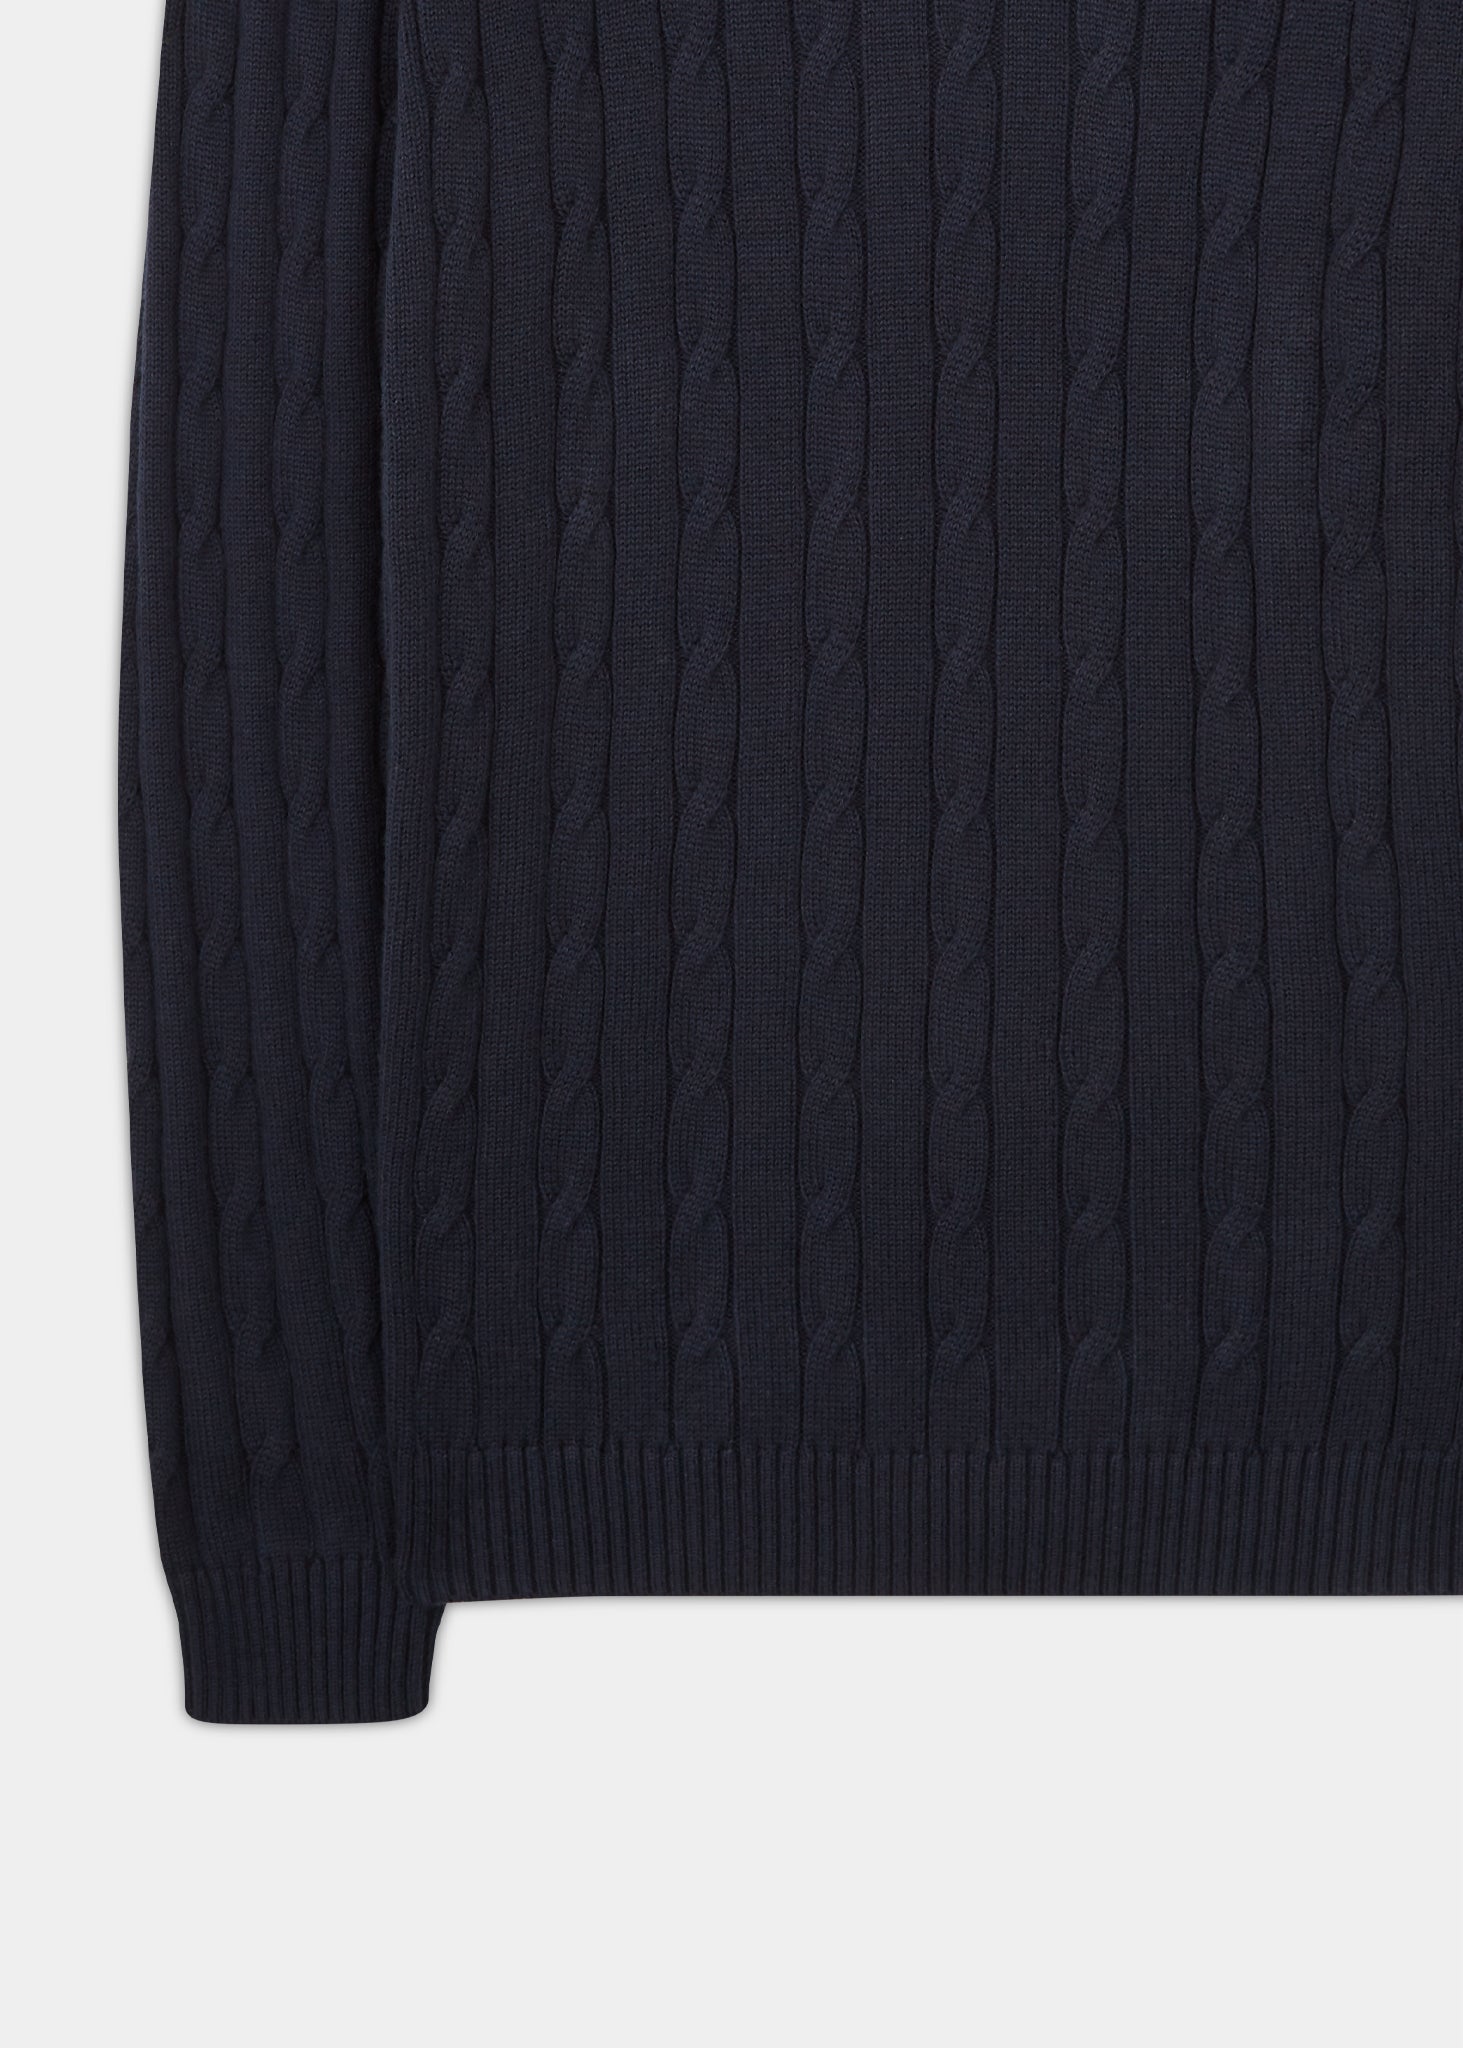 Men's cotton cashmere cable knit jumper in dark navy